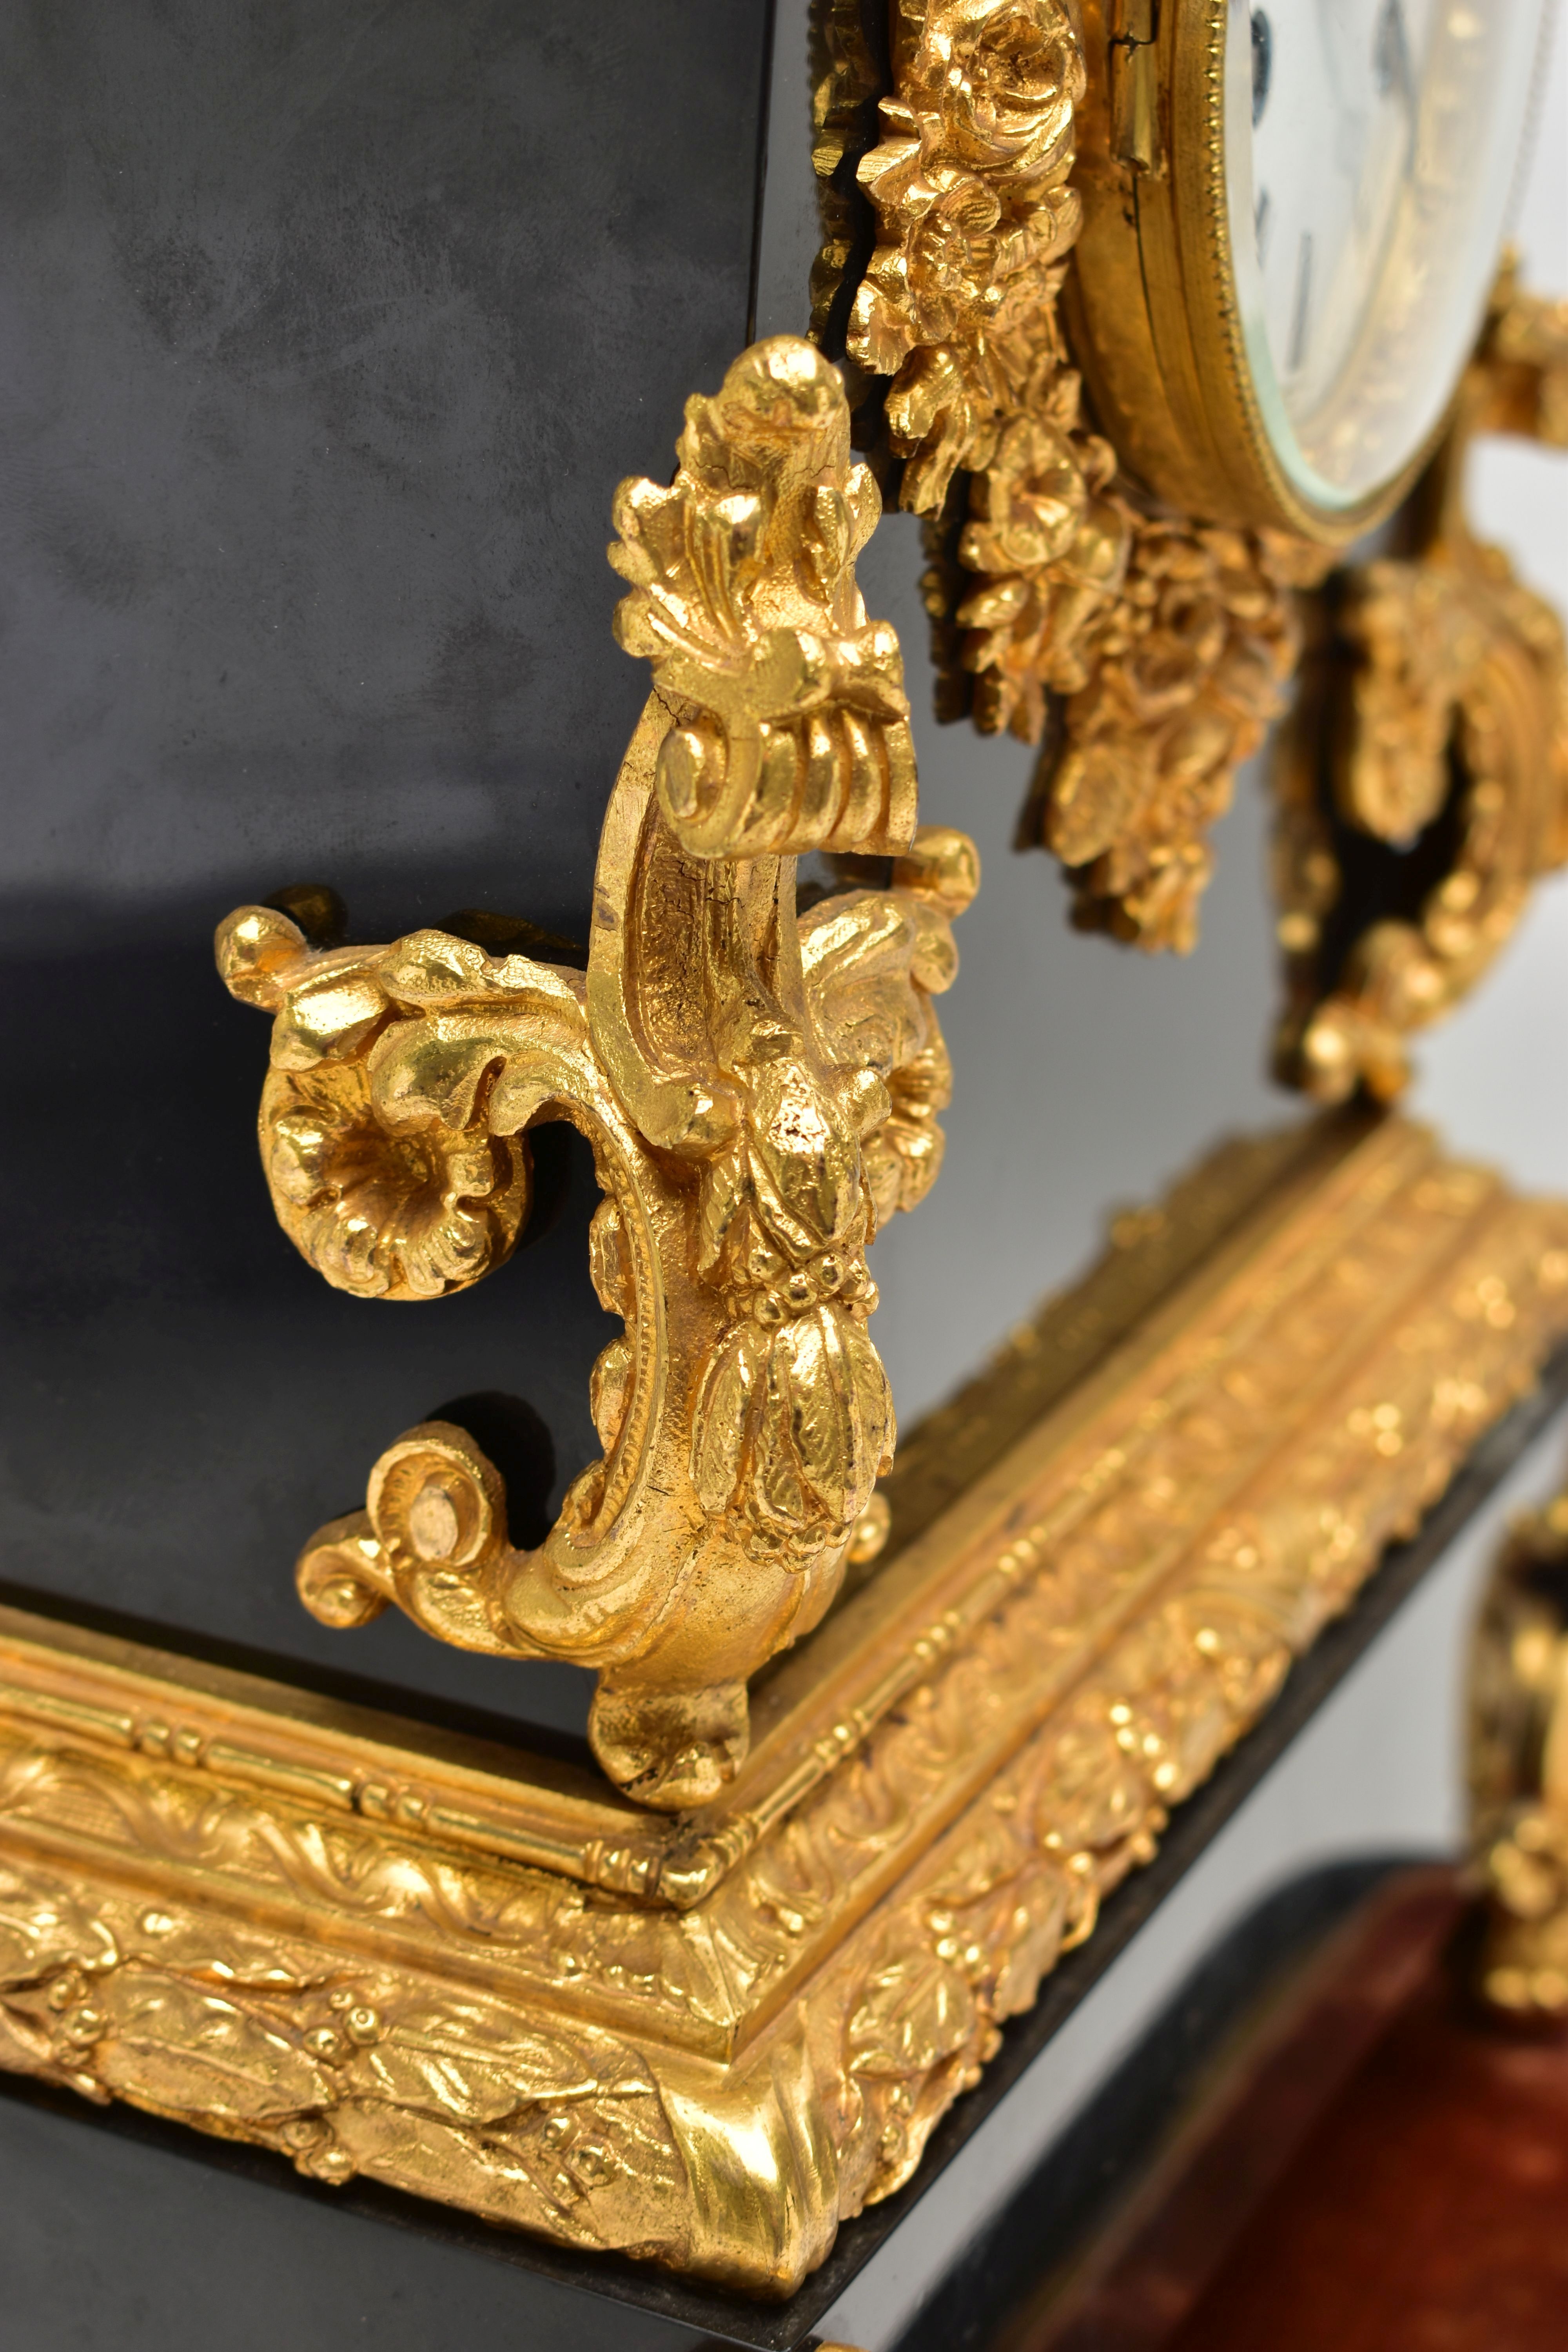 A LATE 19TH CENTURY BLACK SLATE AND GILT METAL CHARLES FRODSHAM OF PARIS MANTEL CLOCK UNDER A - Image 10 of 13